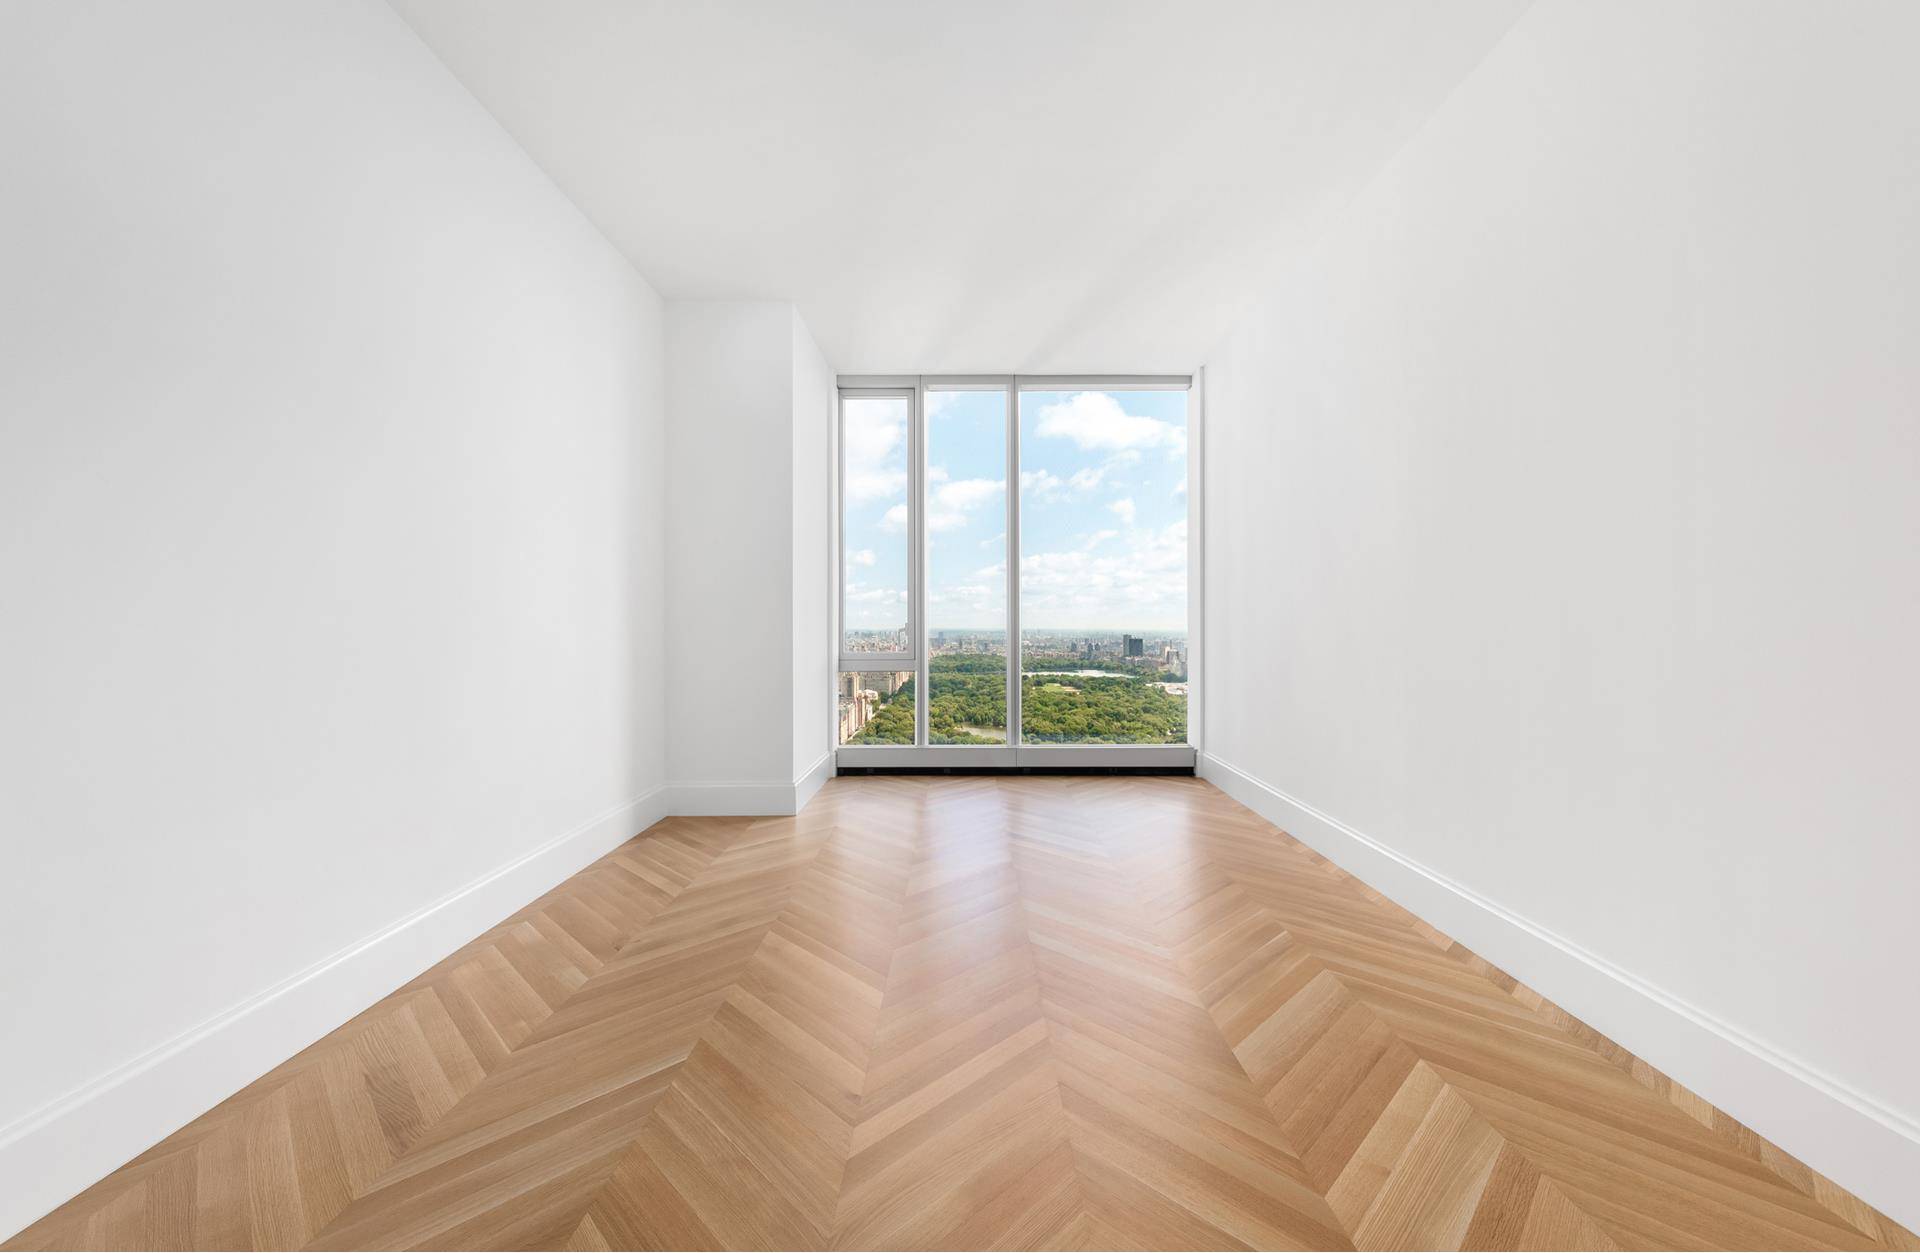 Live on top of the world in this two bedroom, two and one half bathroom residence offering spectacular direct Central Park vista views from every room.